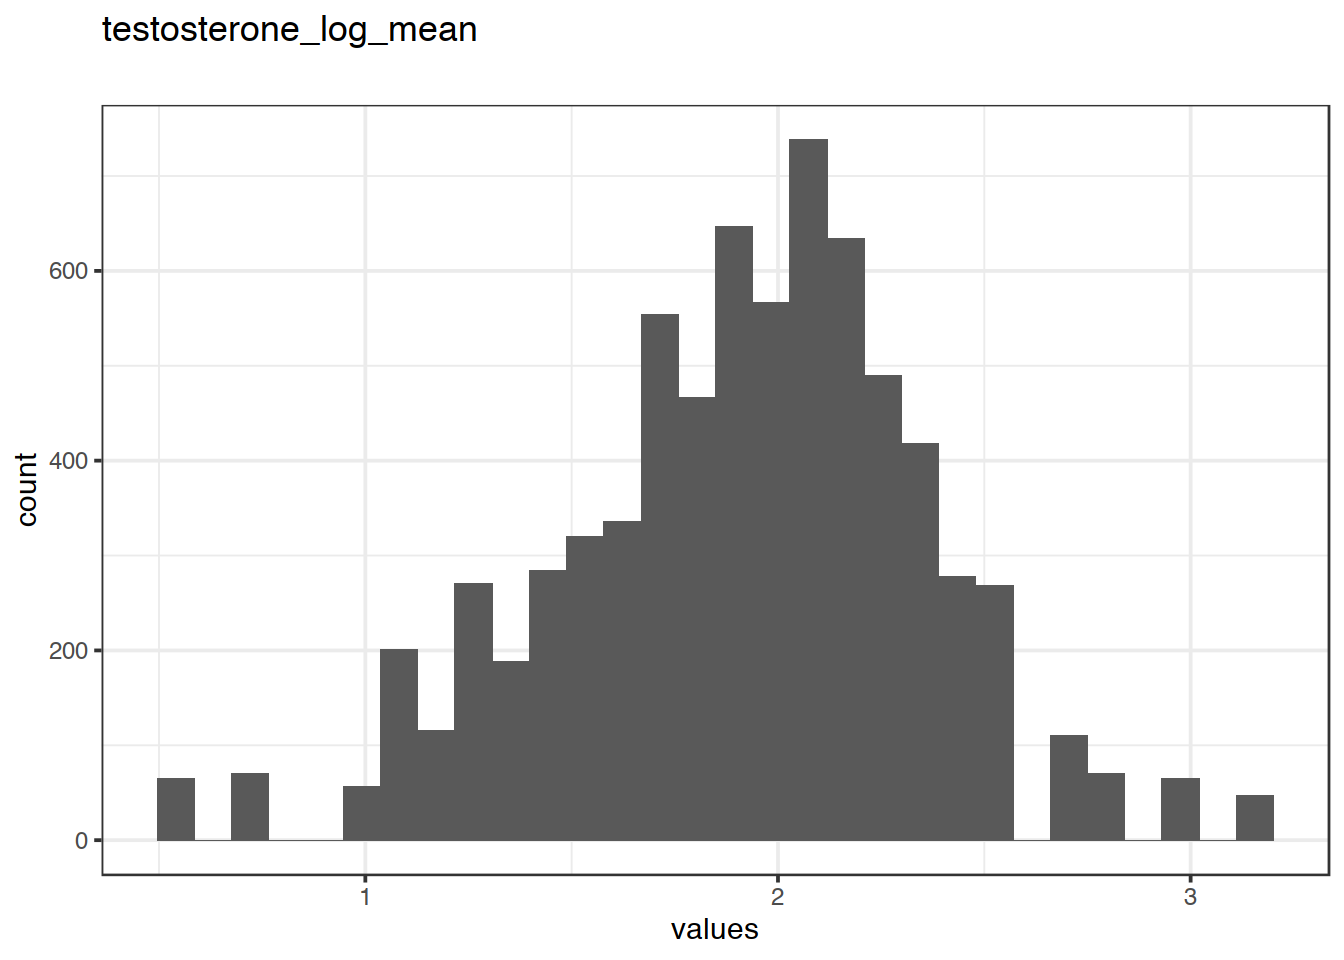 Distribution of values for testosterone_log_mean